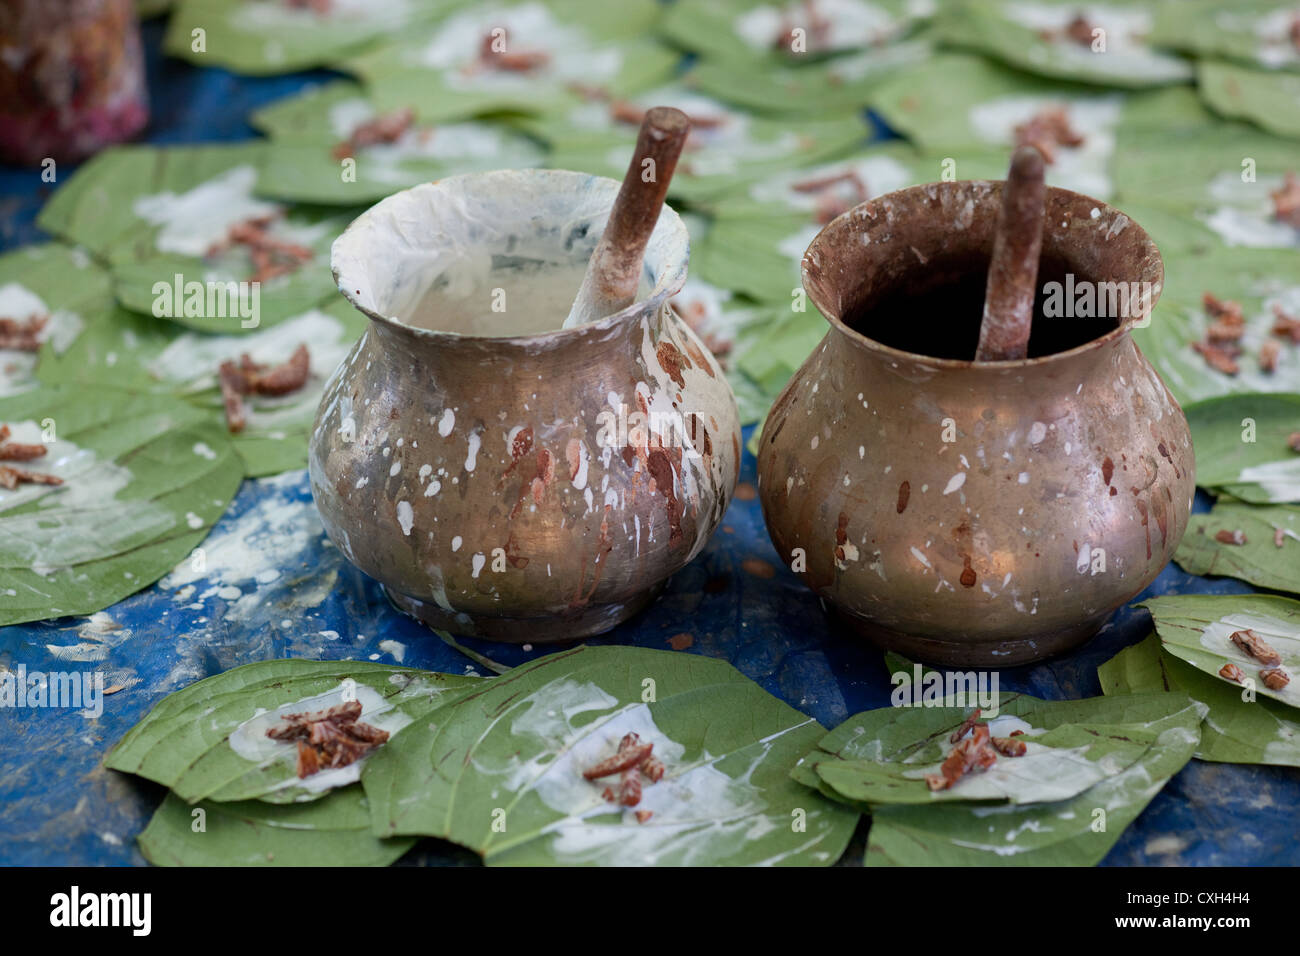 Betel leaves for making Betel Nut, commonly chewed amongst the local Burmese people Inle Lake Burma Myanmar Stock Photo